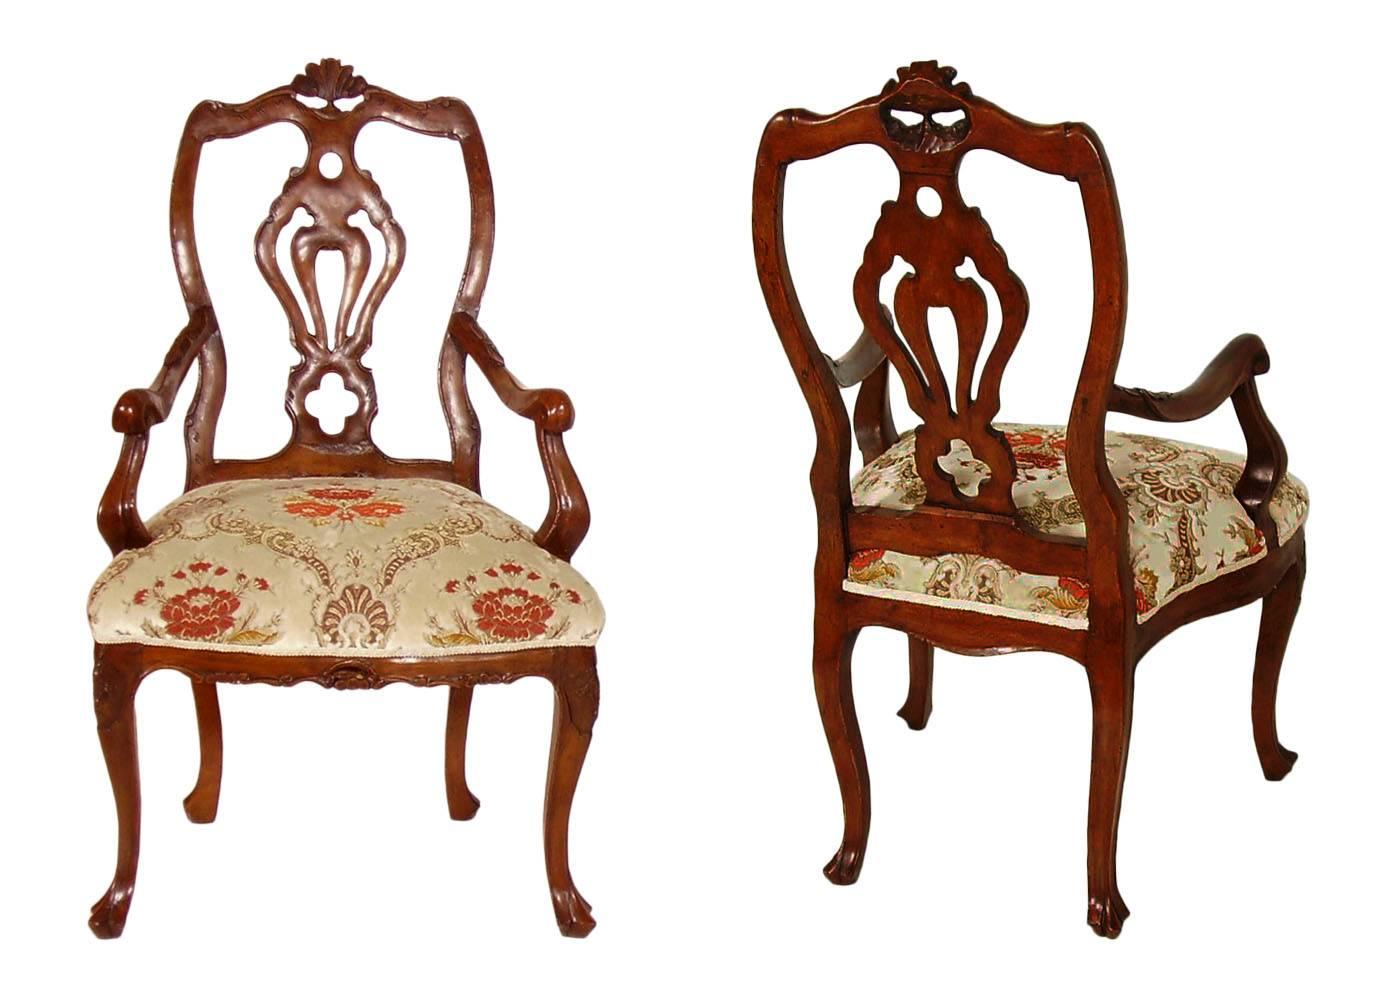 Code 

Pair of early 1700 Venetian Rococo armchairs have richly carved details. The backs have on top central carved shell while the armrests curve outward ending in carved C-scrolls. The chairs have front cabriole legs ending in carved feet. The